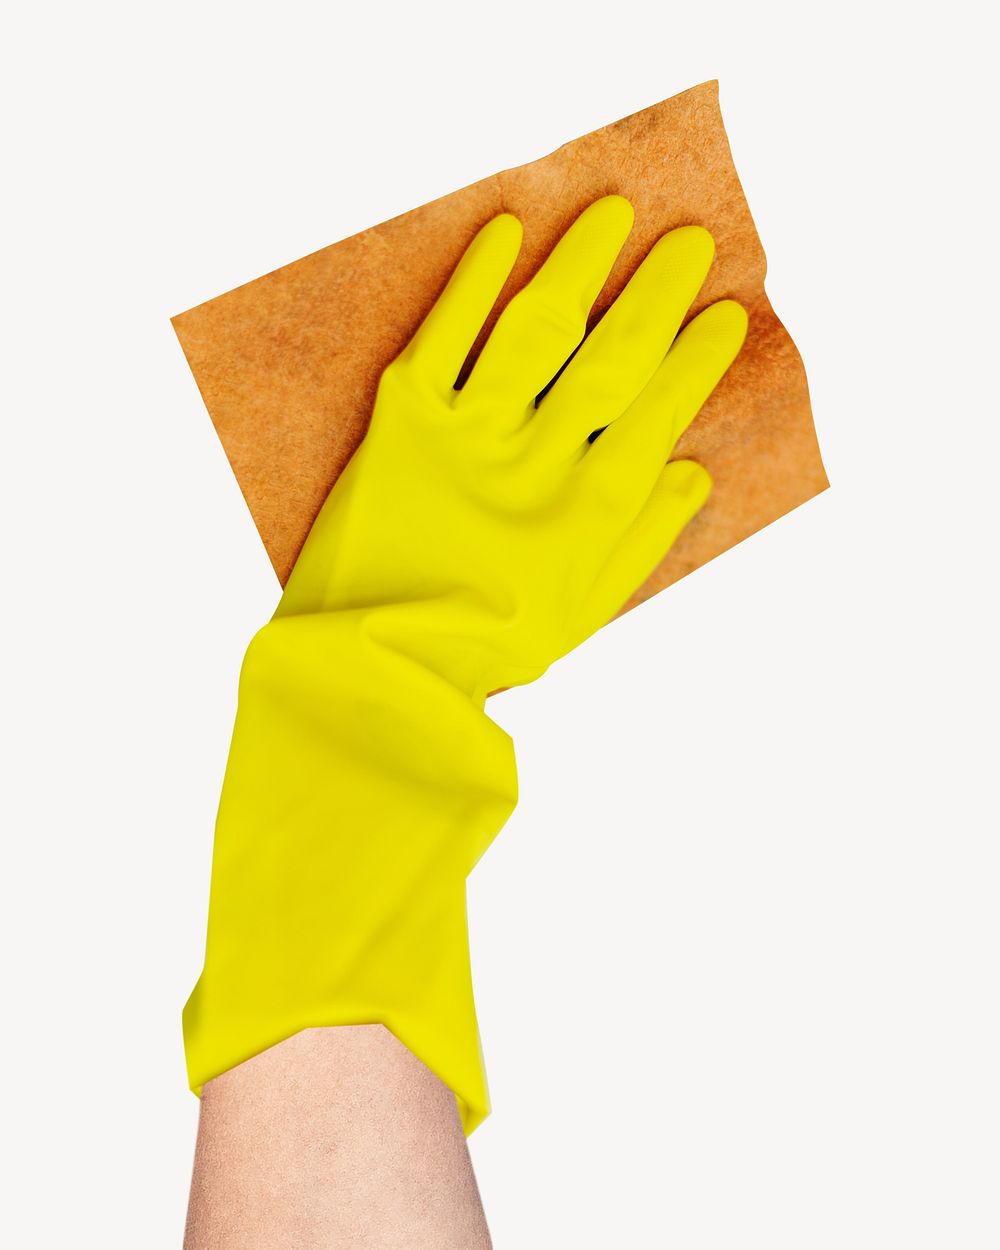 Yellow glove cleaning isolated image on white